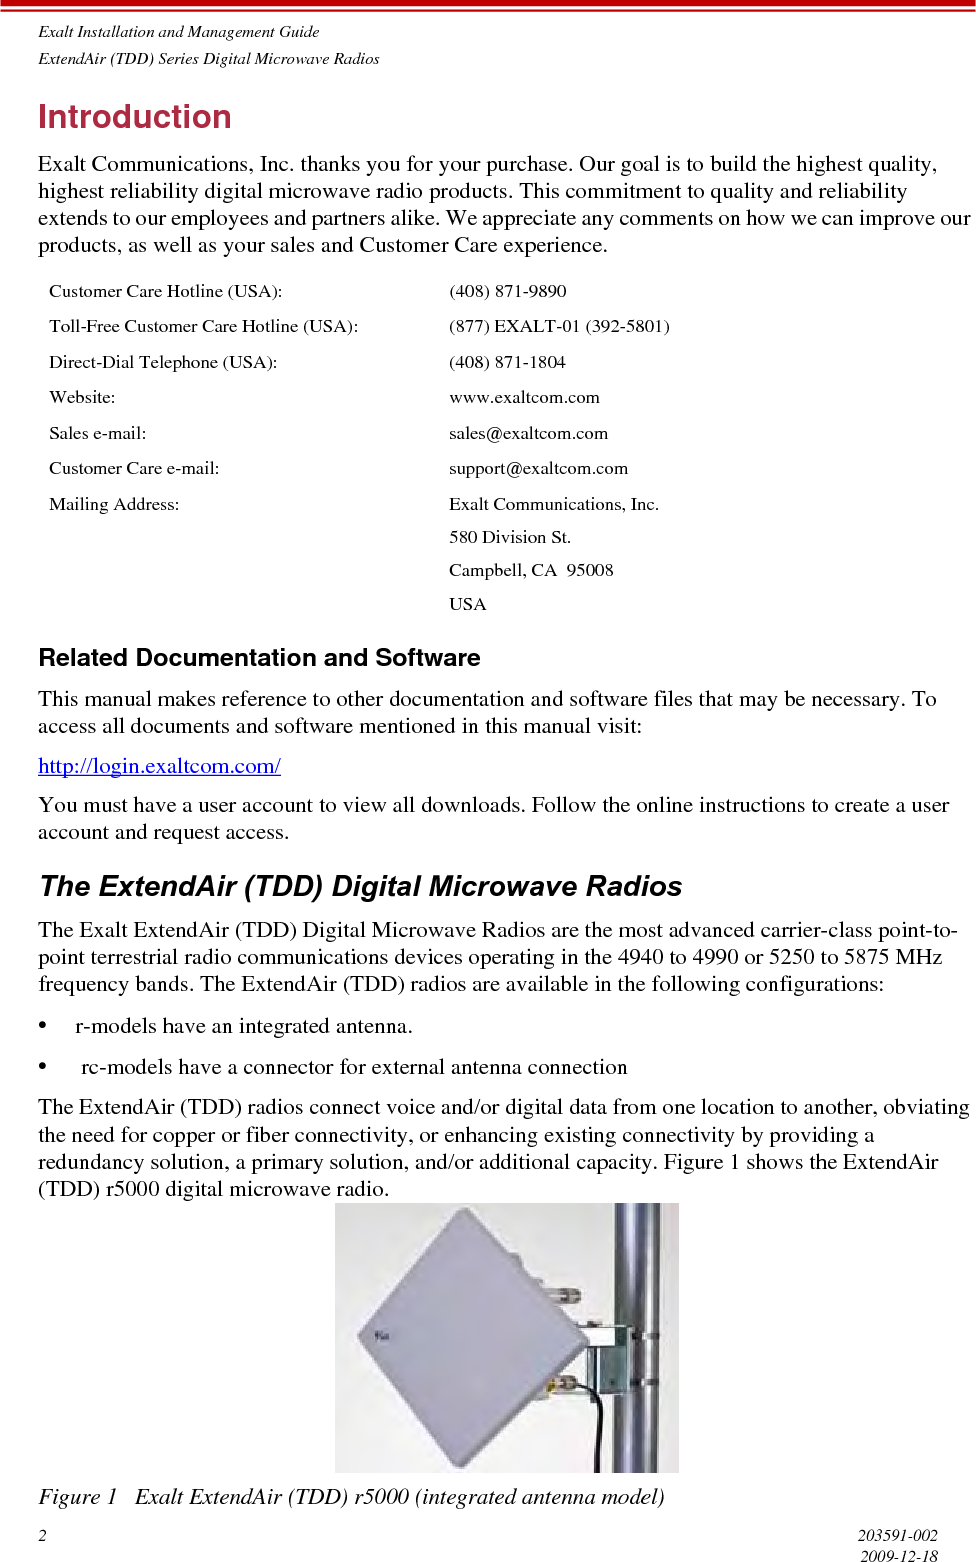 Exalt Installation and Management GuideExtendAir (TDD) Series Digital Microwave Radios2203591-0022009-12-18IntroductionExalt Communications, Inc. thanks you for your purchase. Our goal is to build the highest quality, highest reliability digital microwave radio products. This commitment to quality and reliability extends to our employees and partners alike. We appreciate any comments on how we can improve our products, as well as your sales and Customer Care experience.Related Documentation and SoftwareThis manual makes reference to other documentation and software files that may be necessary. To access all documents and software mentioned in this manual visit:http://login.exaltcom.com/You must have a user account to view all downloads. Follow the online instructions to create a user account and request access.The ExtendAir (TDD) Digital Microwave RadiosThe Exalt ExtendAir (TDD) Digital Microwave Radios are the most advanced carrier-class point-to-point terrestrial radio communications devices operating in the 4940 to 4990 or 5250 to 5875 MHz frequency bands. The ExtendAir (TDD) radios are available in the following configurations:•r-models have an integrated antenna.• rc-models have a connector for external antenna connectionThe ExtendAir (TDD) radios connect voice and/or digital data from one location to another, obviating the need for copper or fiber connectivity, or enhancing existing connectivity by providing a redundancy solution, a primary solution, and/or additional capacity. Figure 1 shows the ExtendAir (TDD) r5000 digital microwave radio.Figure 1   Exalt ExtendAir (TDD) r5000 (integrated antenna model)Customer Care Hotline (USA): (408) 871-9890Toll-Free Customer Care Hotline (USA): (877) EXALT-01 (392-5801)Direct-Dial Telephone (USA): (408) 871-1804Website: www.exaltcom.comSales e-mail: sales@exaltcom.comCustomer Care e-mail: support@exaltcom.comMailing Address: Exalt Communications, Inc.580 Division St.Campbell, CA  95008USA